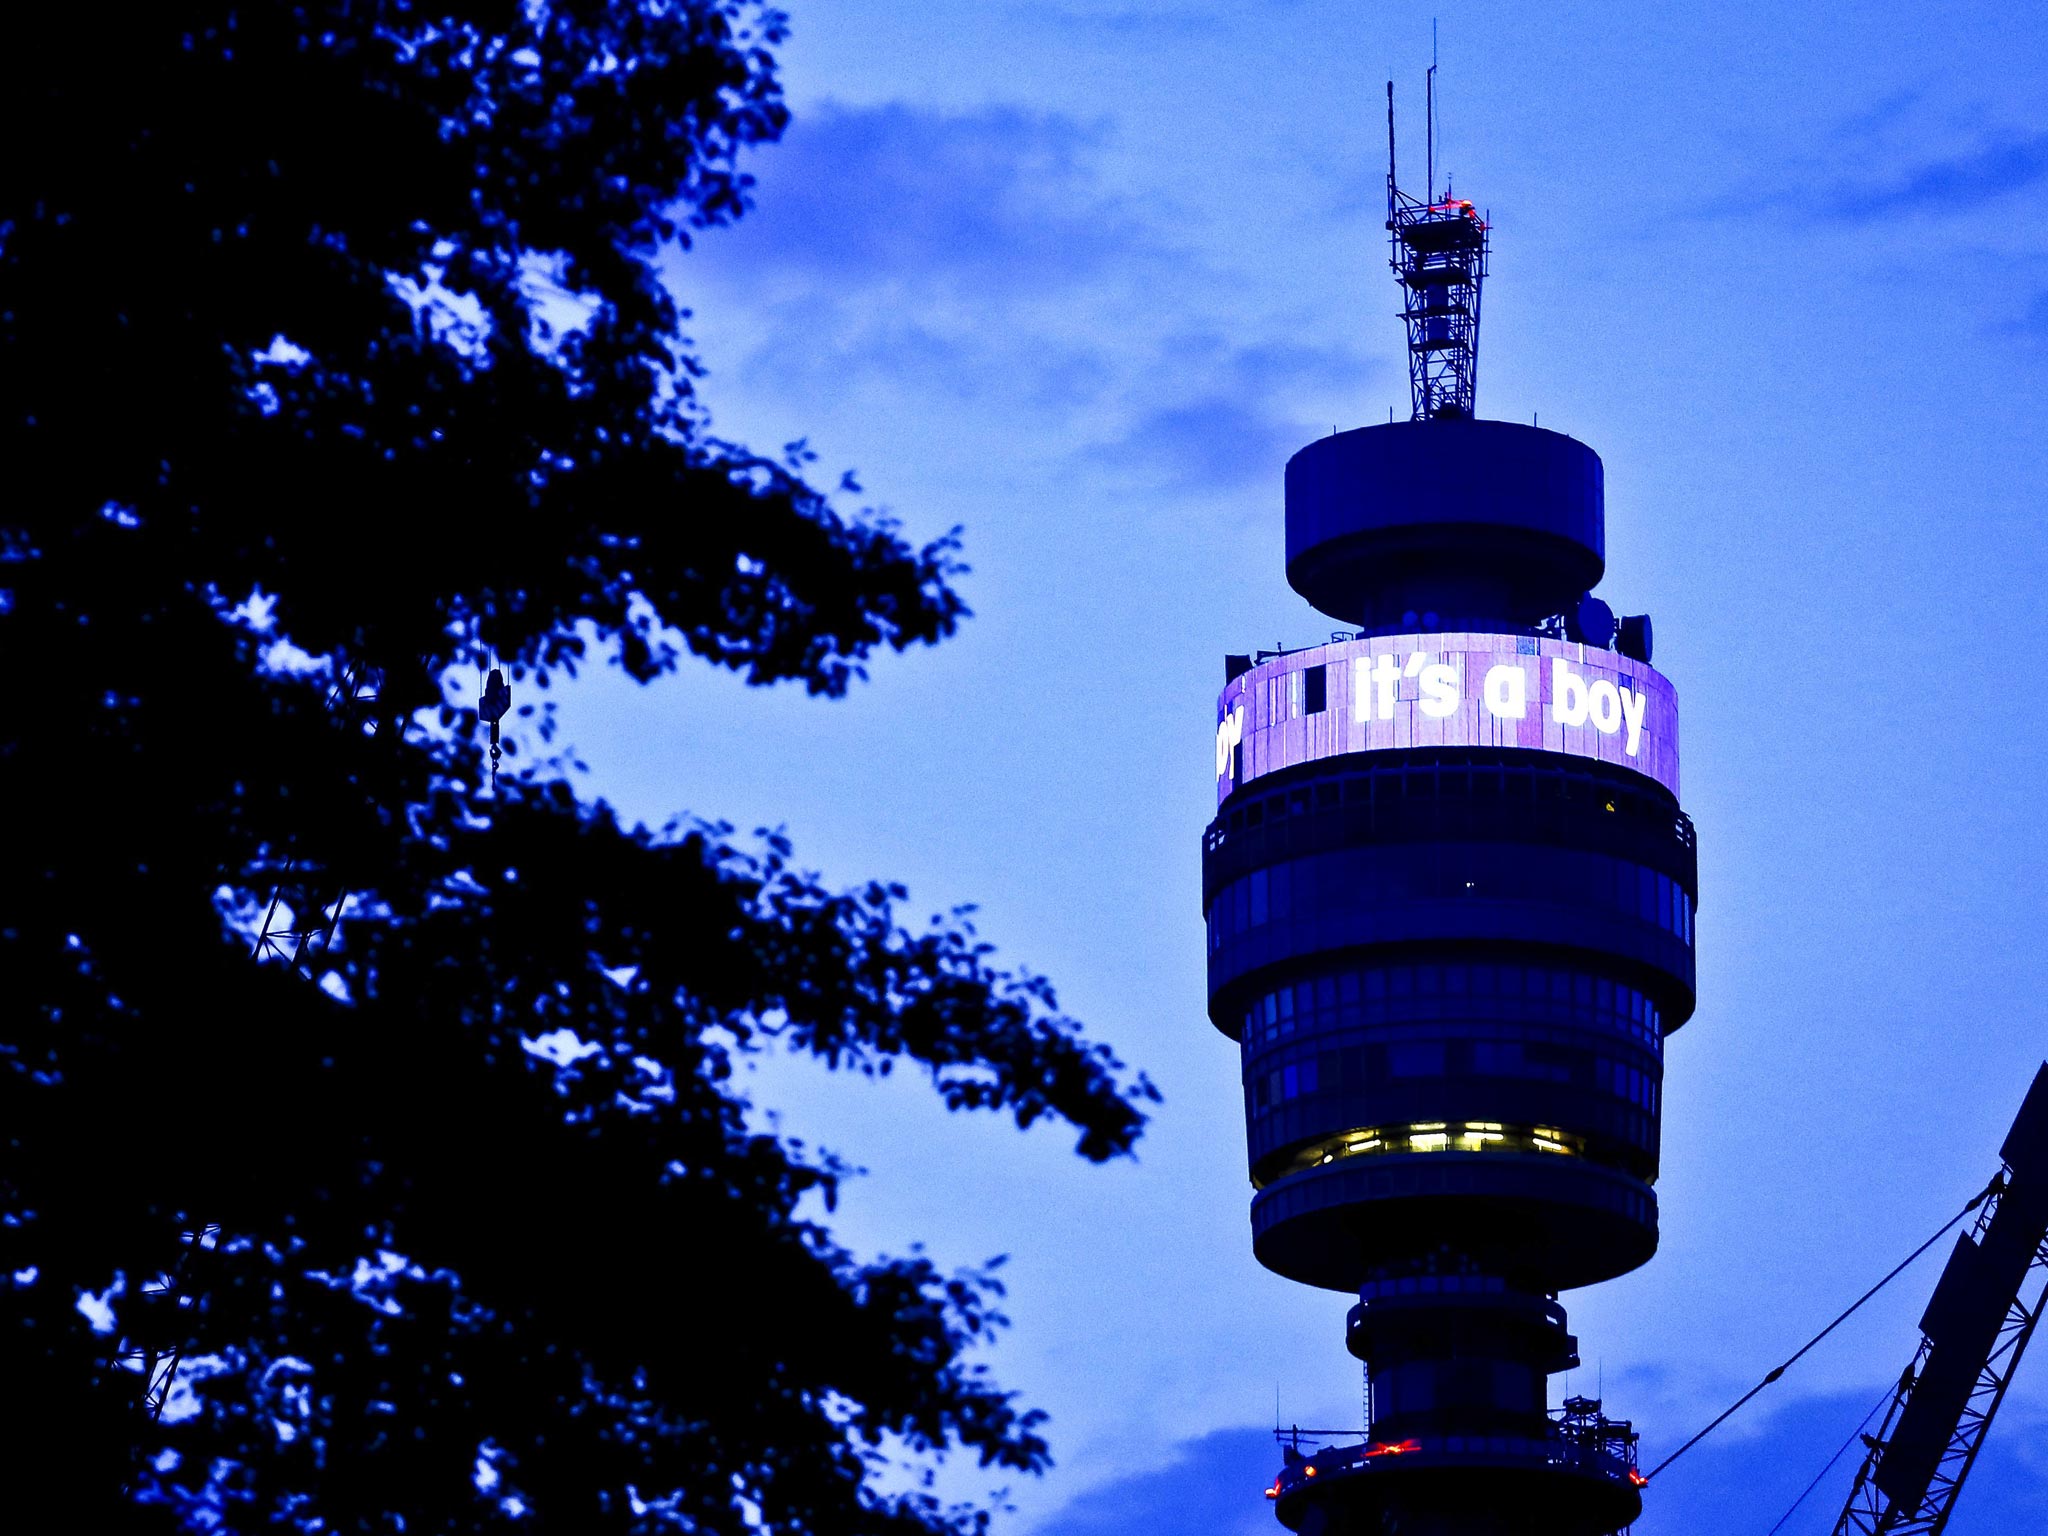 The BT tower shows a message saying "It's a Boy" following the announcement that the Duchess of Cambridge has given birth to a baby boy